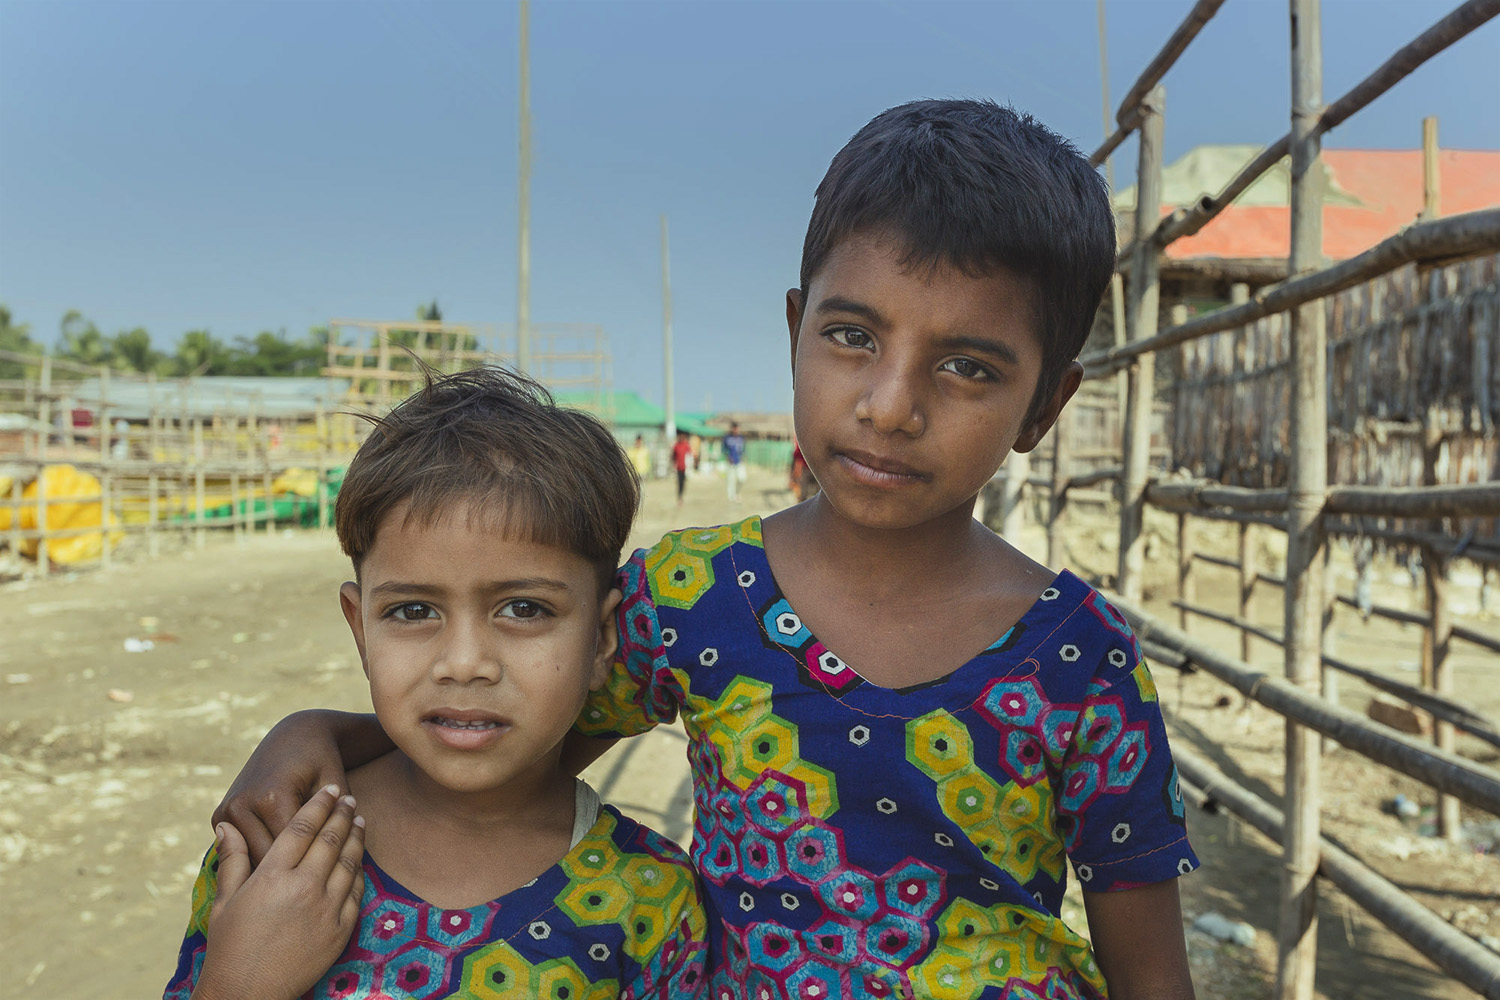 Children of families who live and work at Dhaka - Bangladesh Dried Fish Village.